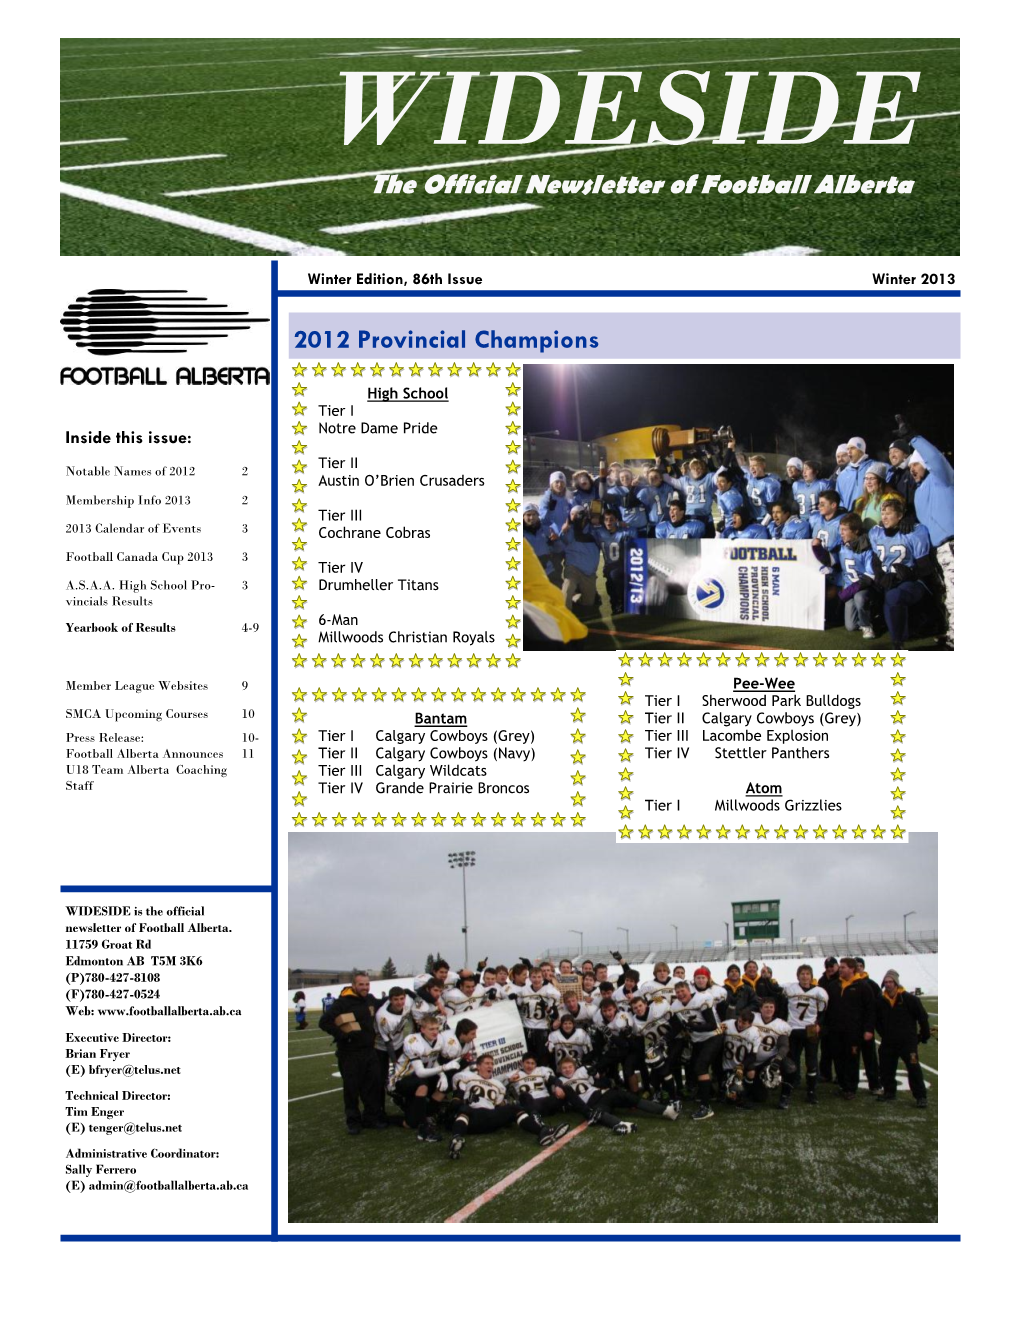 WIDESIDE the Official Newsletter of Football Alberta